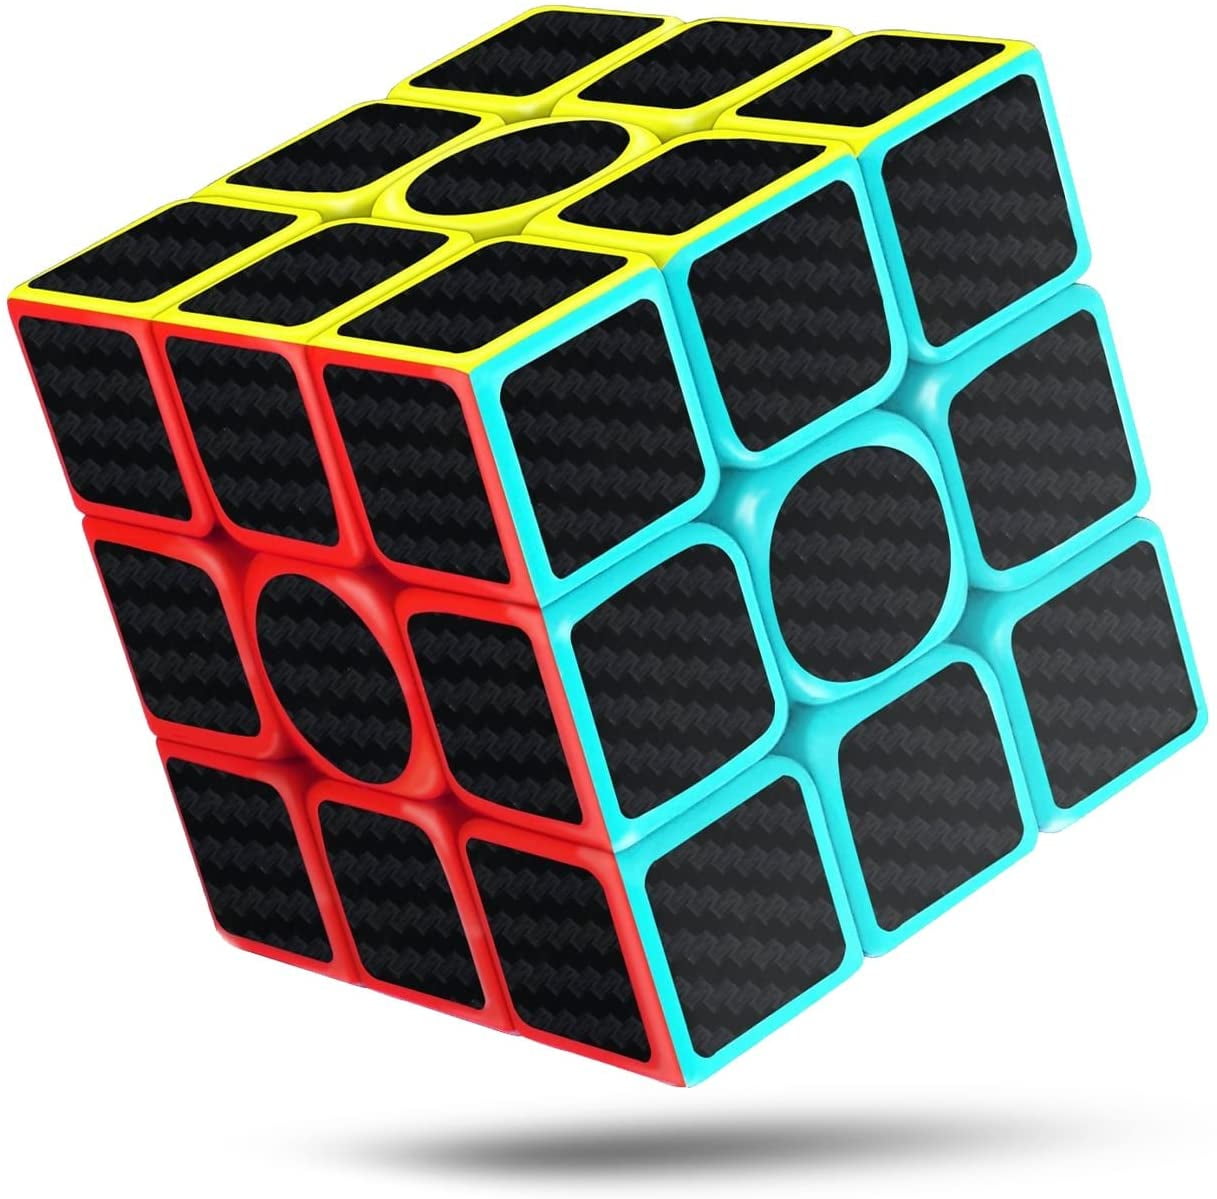 Gritin 3x3x3 Smooth Speed 3D Puzzles With Vivid Color Carbon Fiber S Magic Cube 